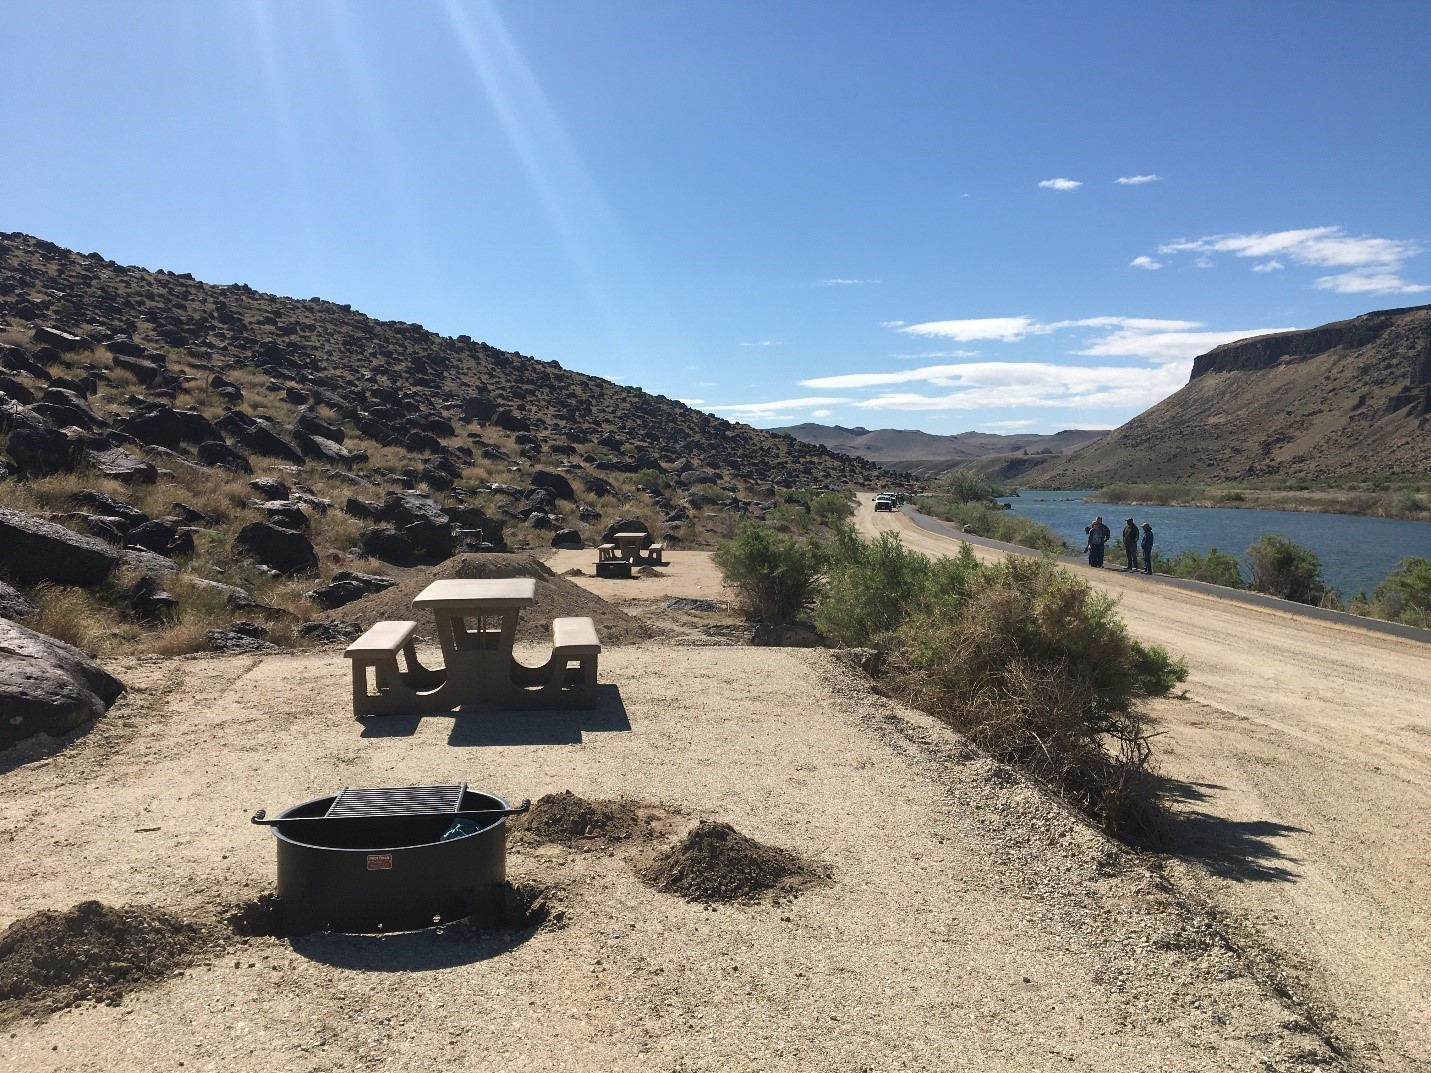 Upgraded picnic and campsite amenities